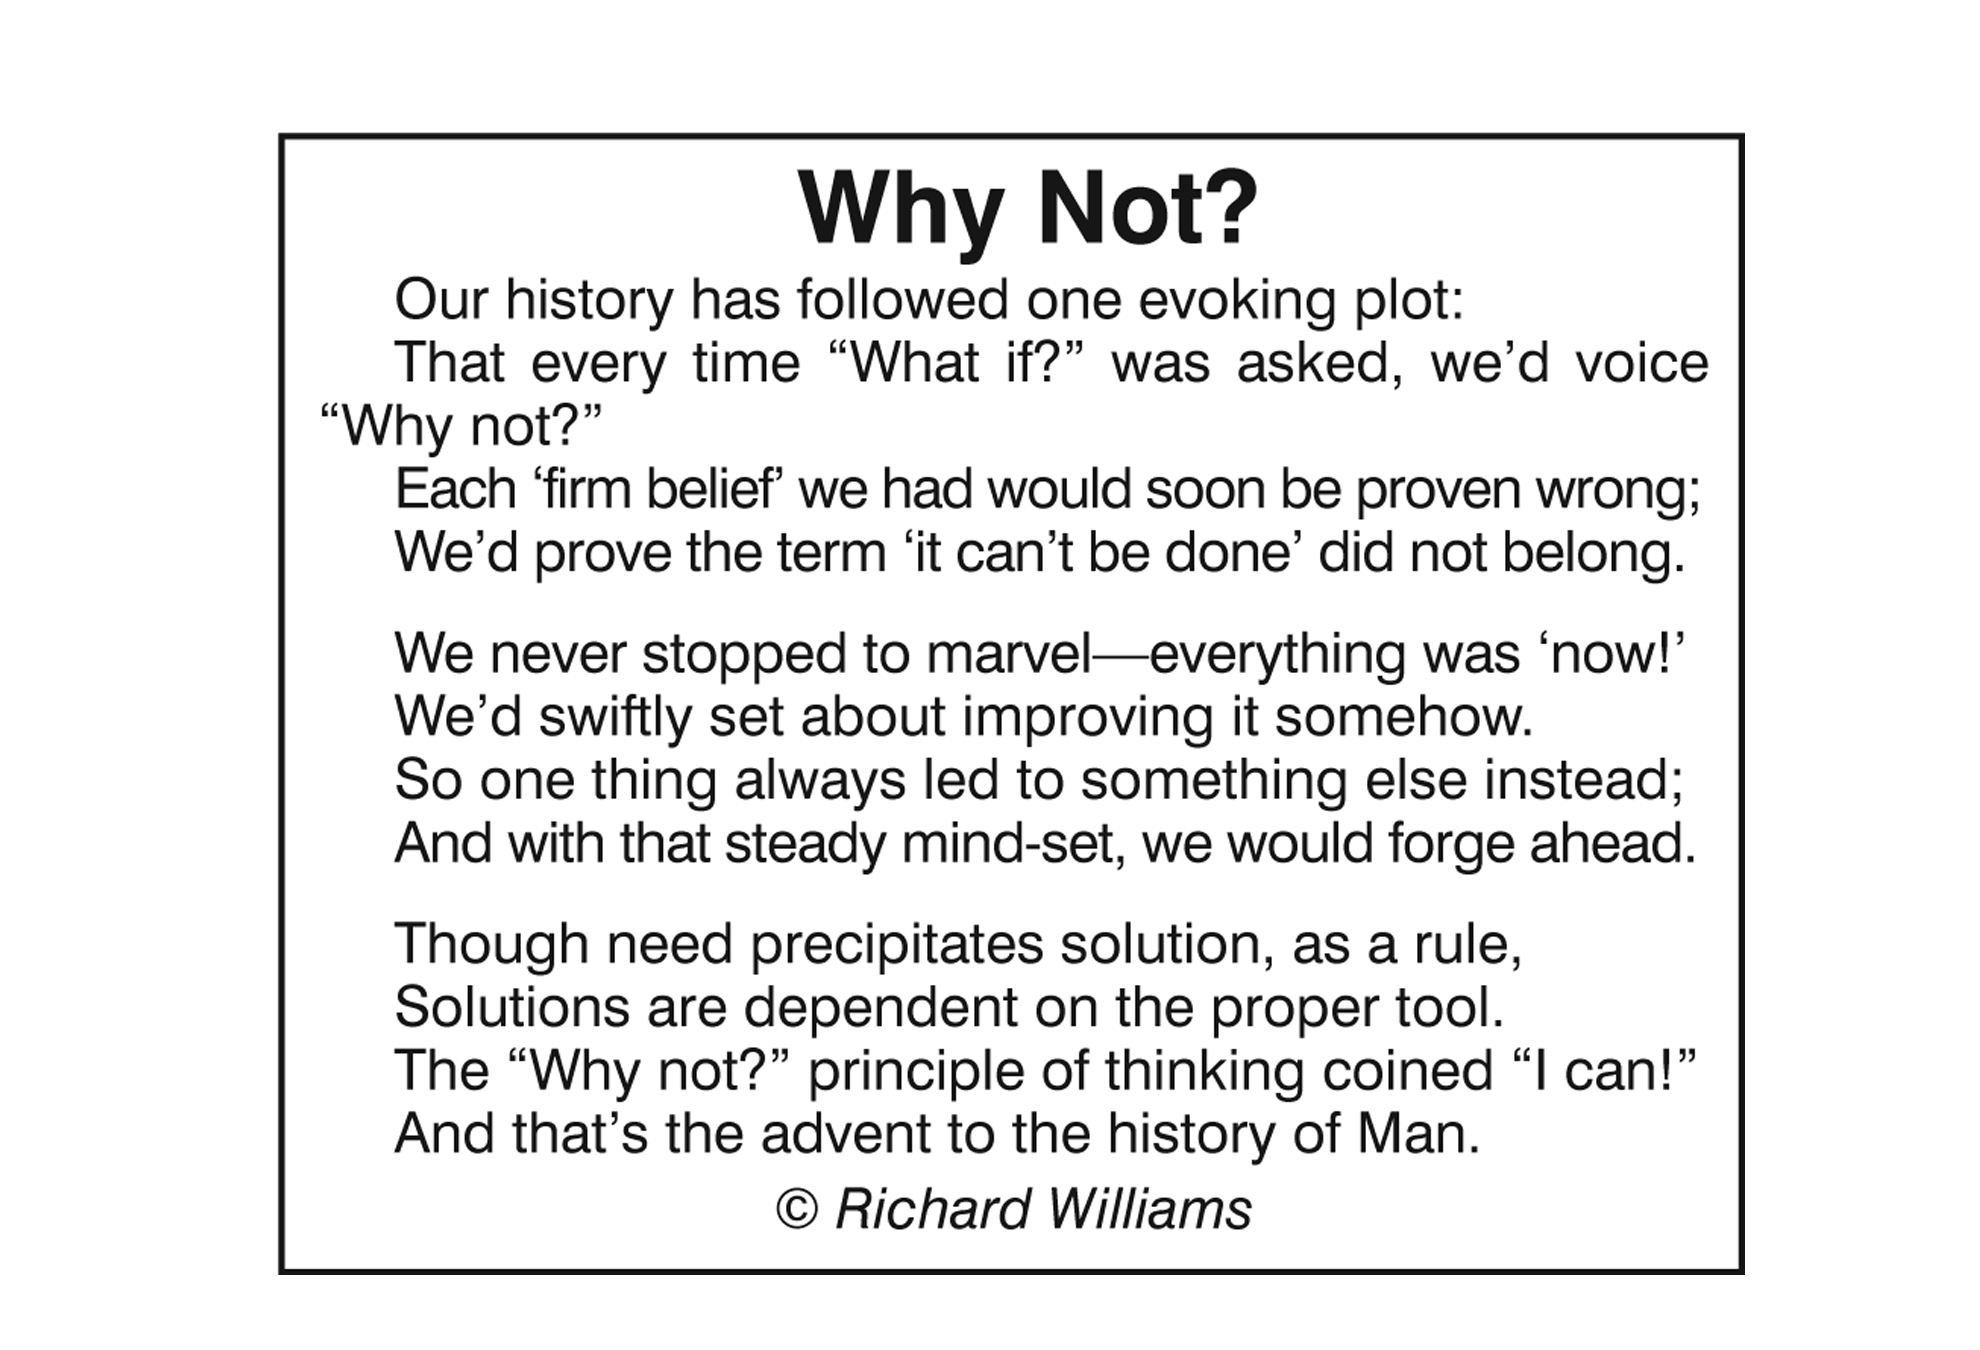 Richard Williams Poem: Why Not?